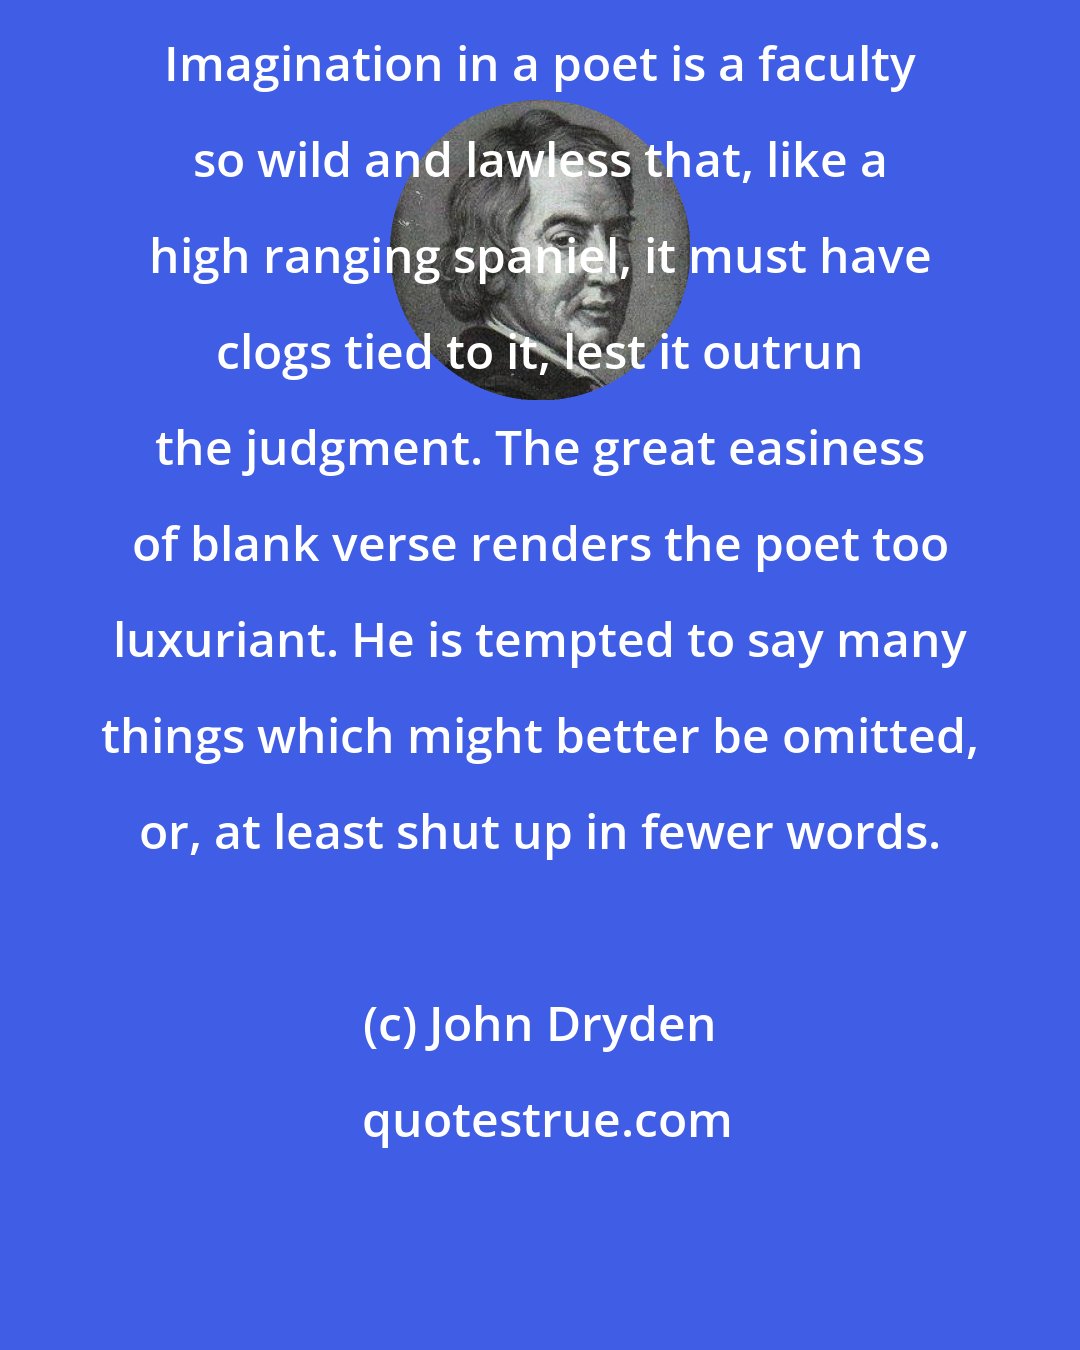 John Dryden: Imagination in a poet is a faculty so wild and lawless that, like a high ranging spaniel, it must have clogs tied to it, lest it outrun the judgment. The great easiness of blank verse renders the poet too luxuriant. He is tempted to say many things which might better be omitted, or, at least shut up in fewer words.